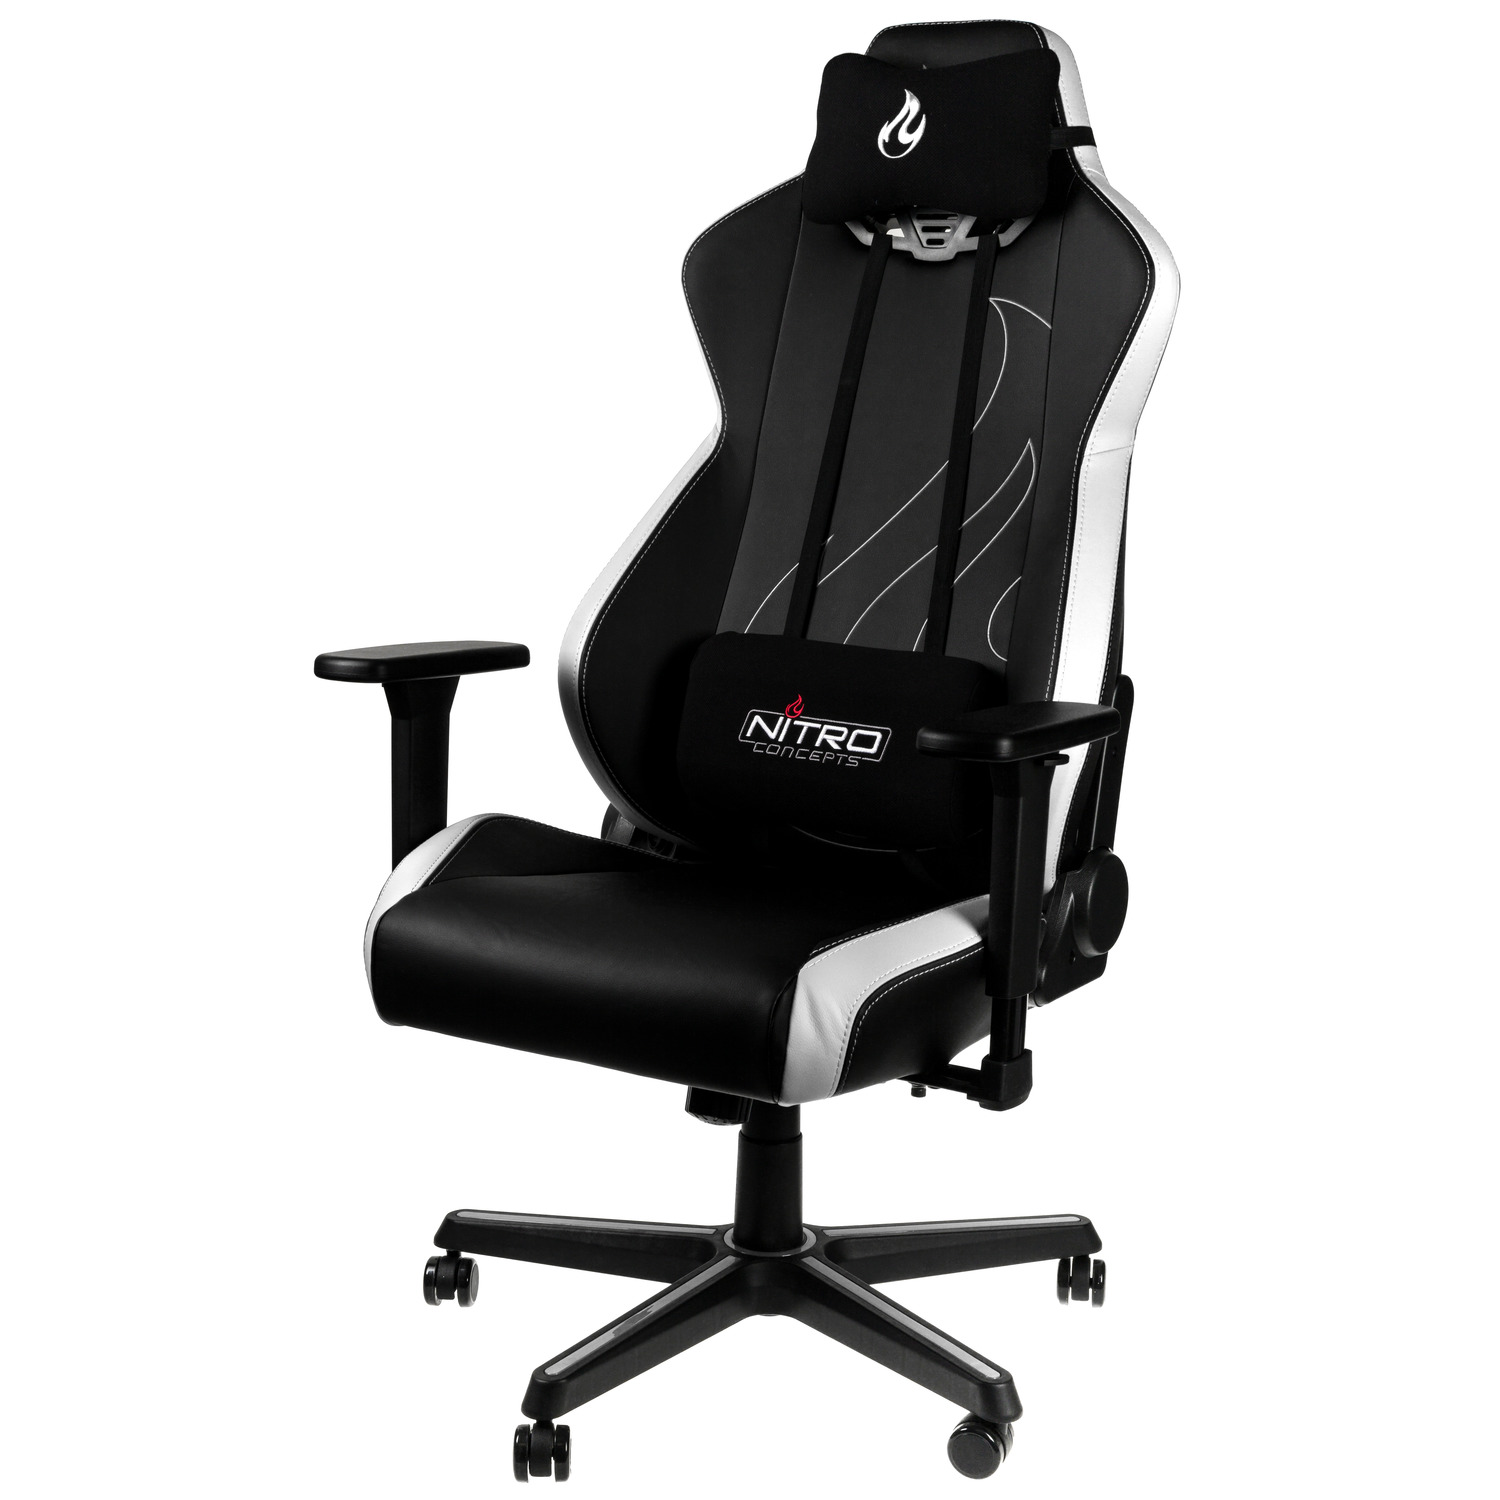 Nitro Concepts - S300 EX Gaming Chair Radiant White